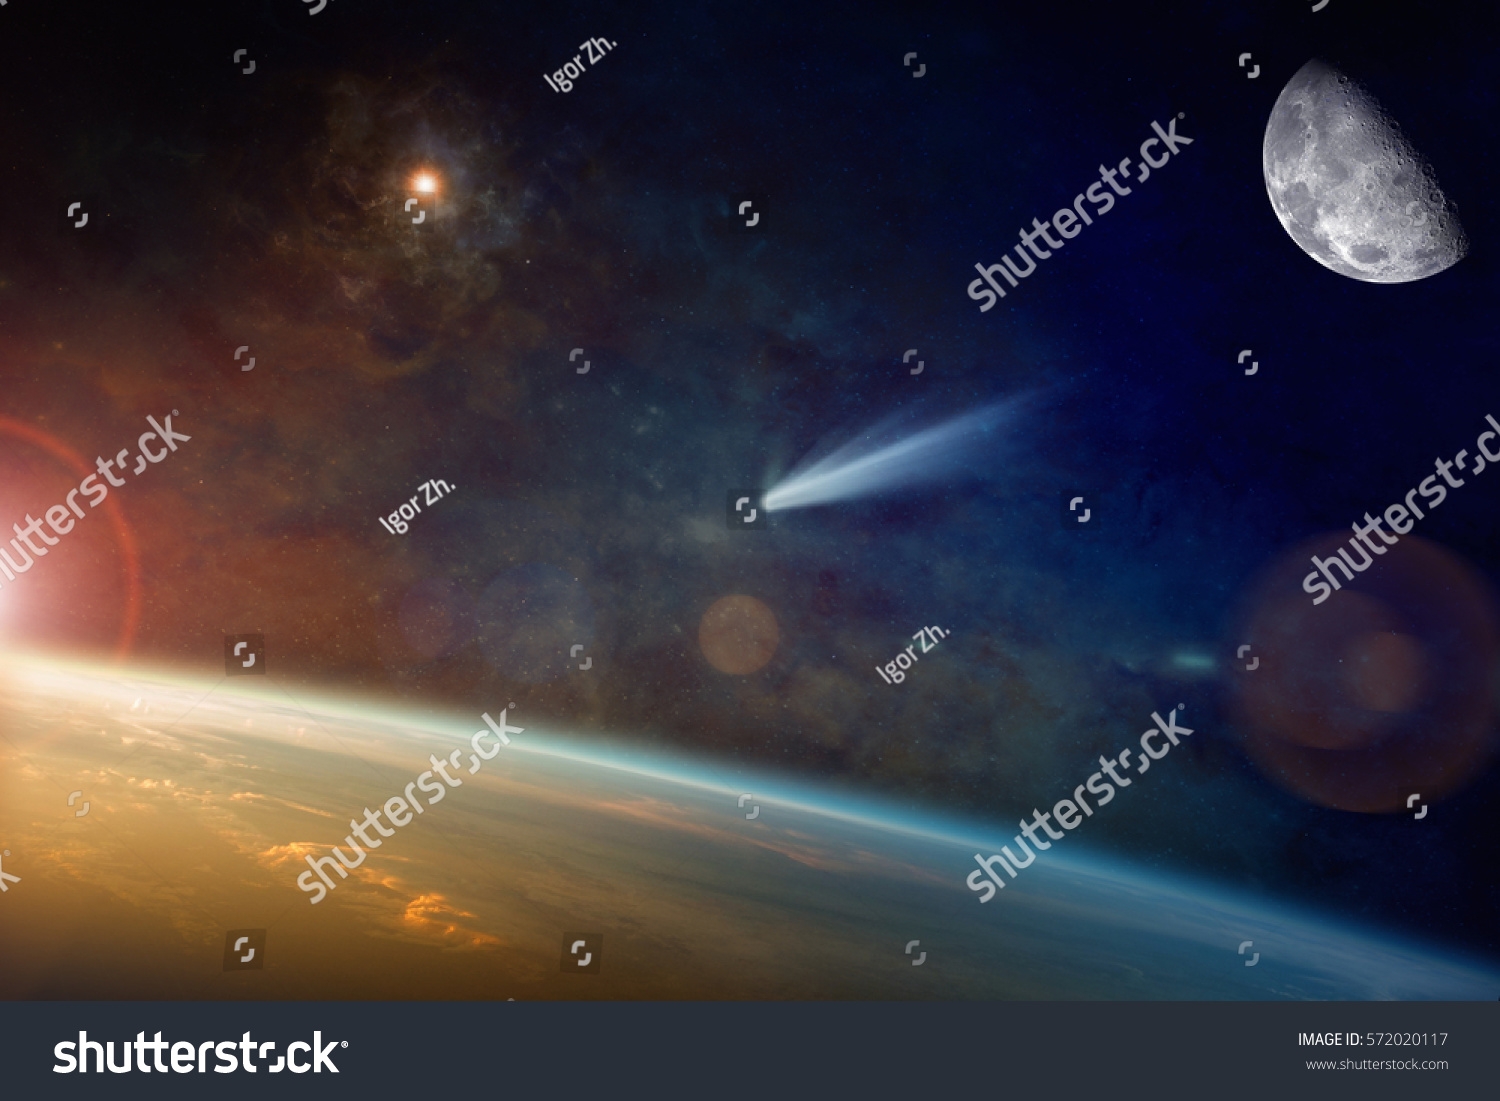 Astronomical scientific background - bright comet approaching to planet Earth in space. Elements of this image furnished by NASA. #572020117